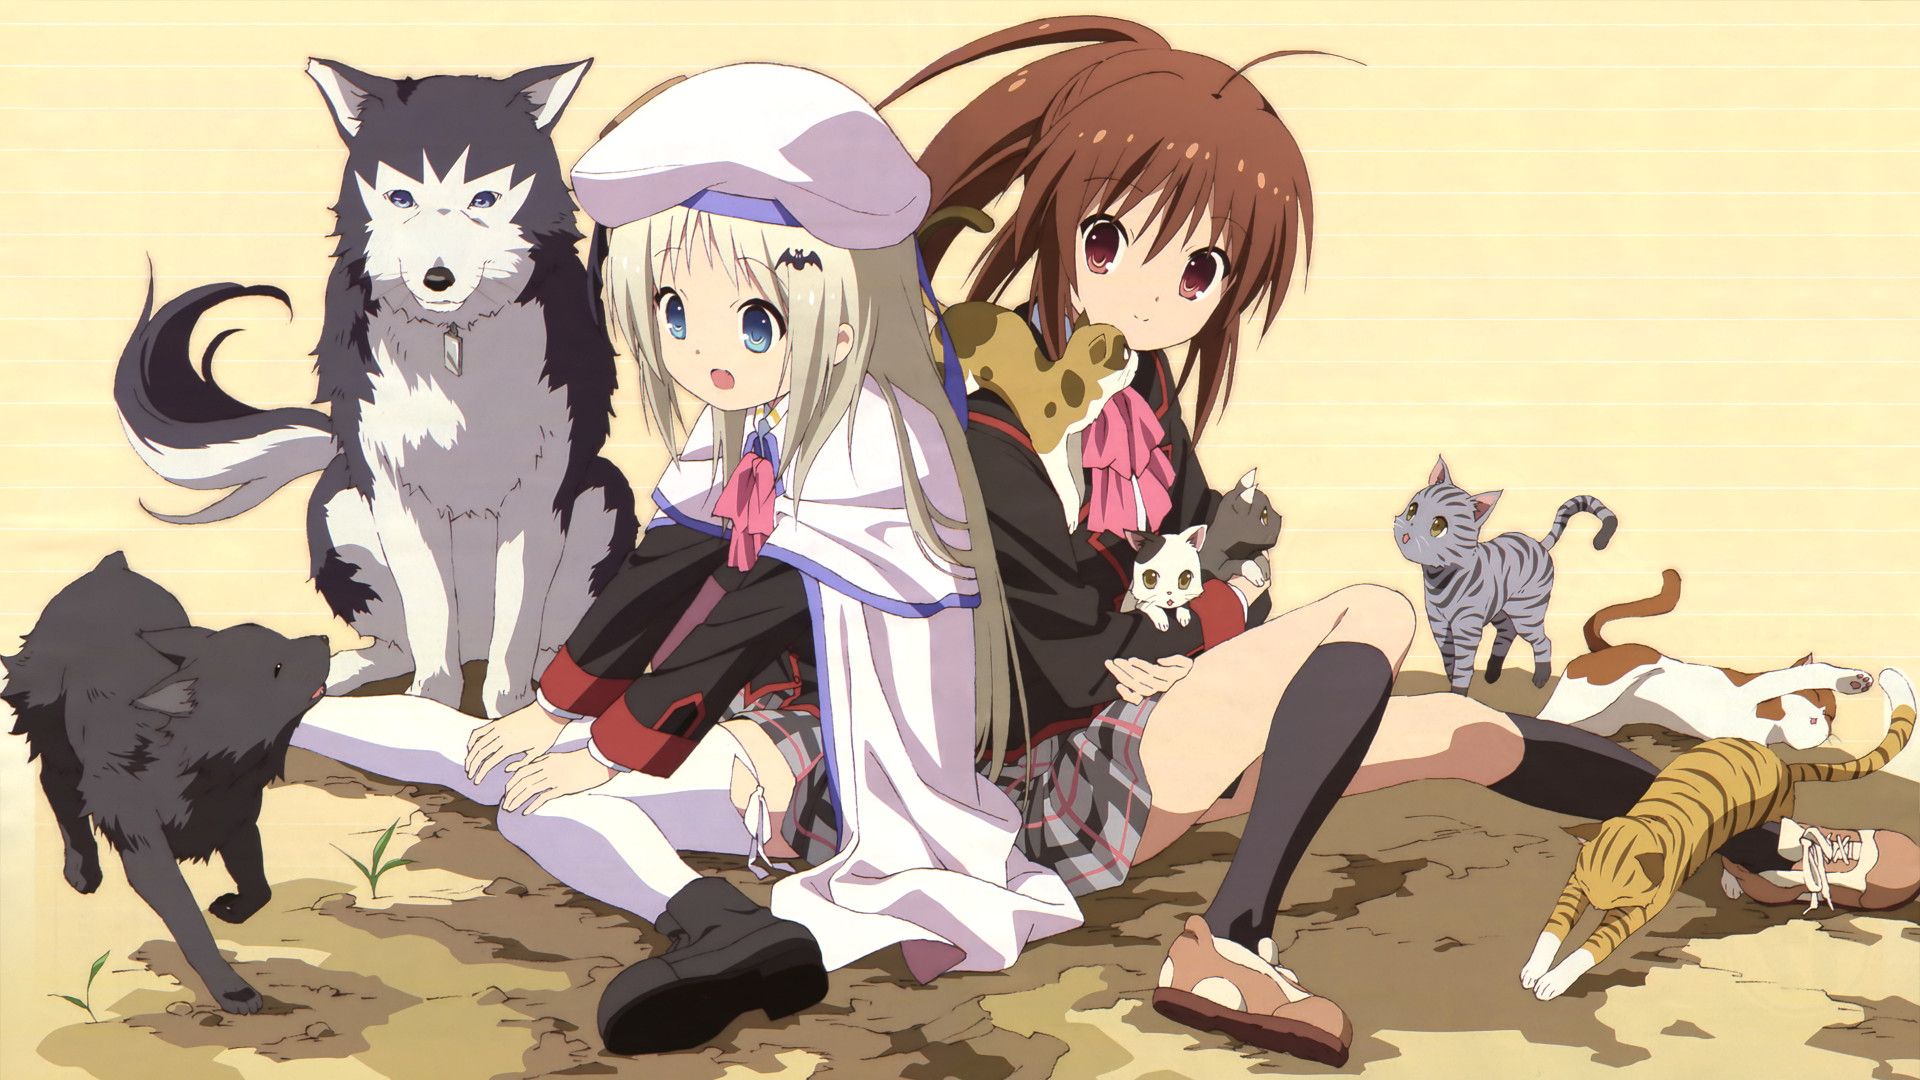 Little Busters! background